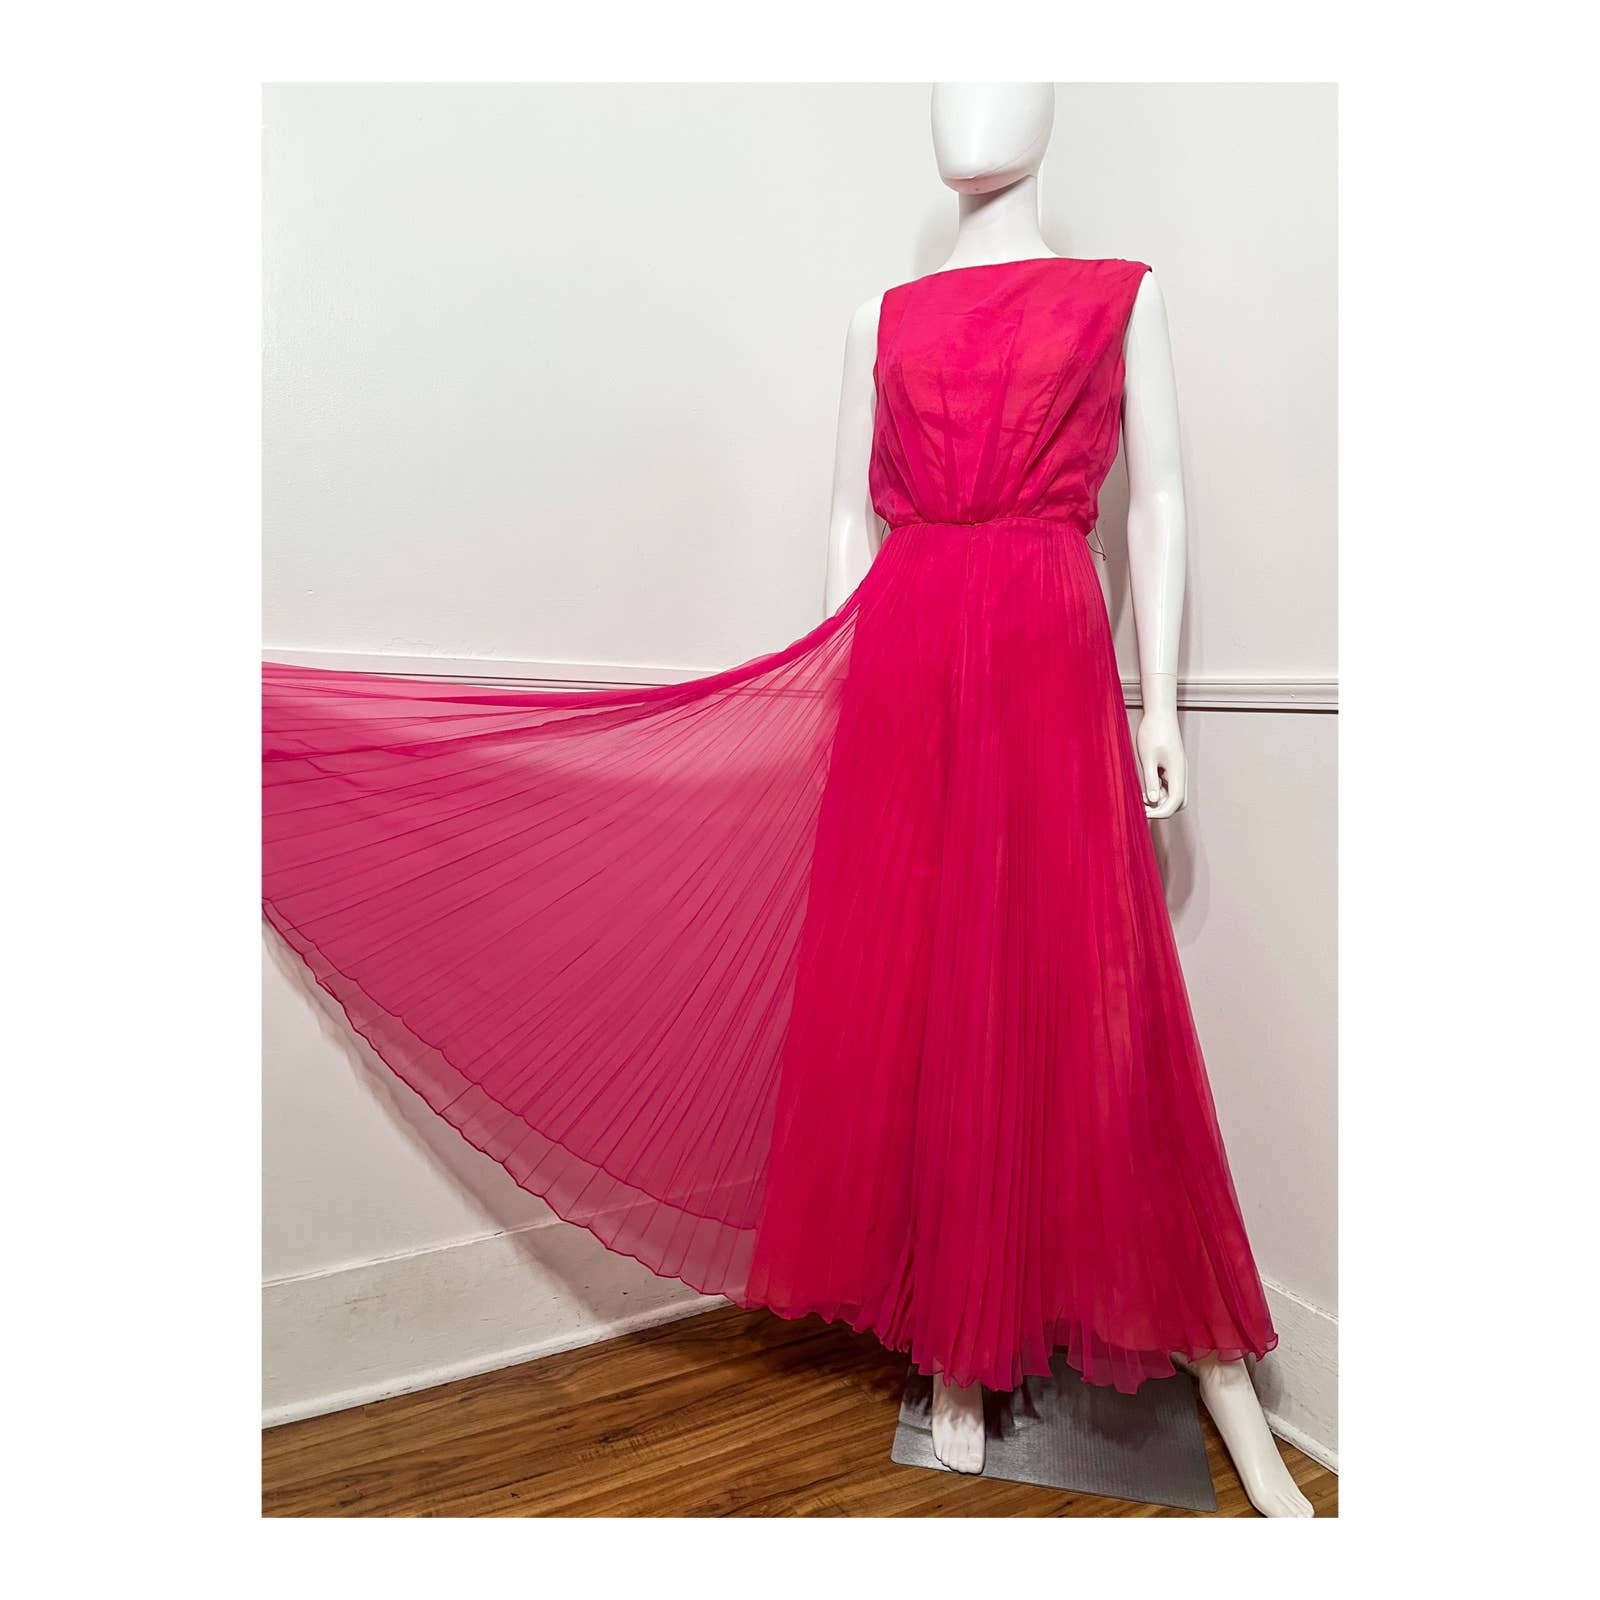 Elegant Fuchsia Dressy Jumpsuits With Sleeves For Women Shiny Puff Sleeves,  Wide Leg, Perfect For Parties, Evenings, And Celebrities Style 221128 From  Kong04, $30.6